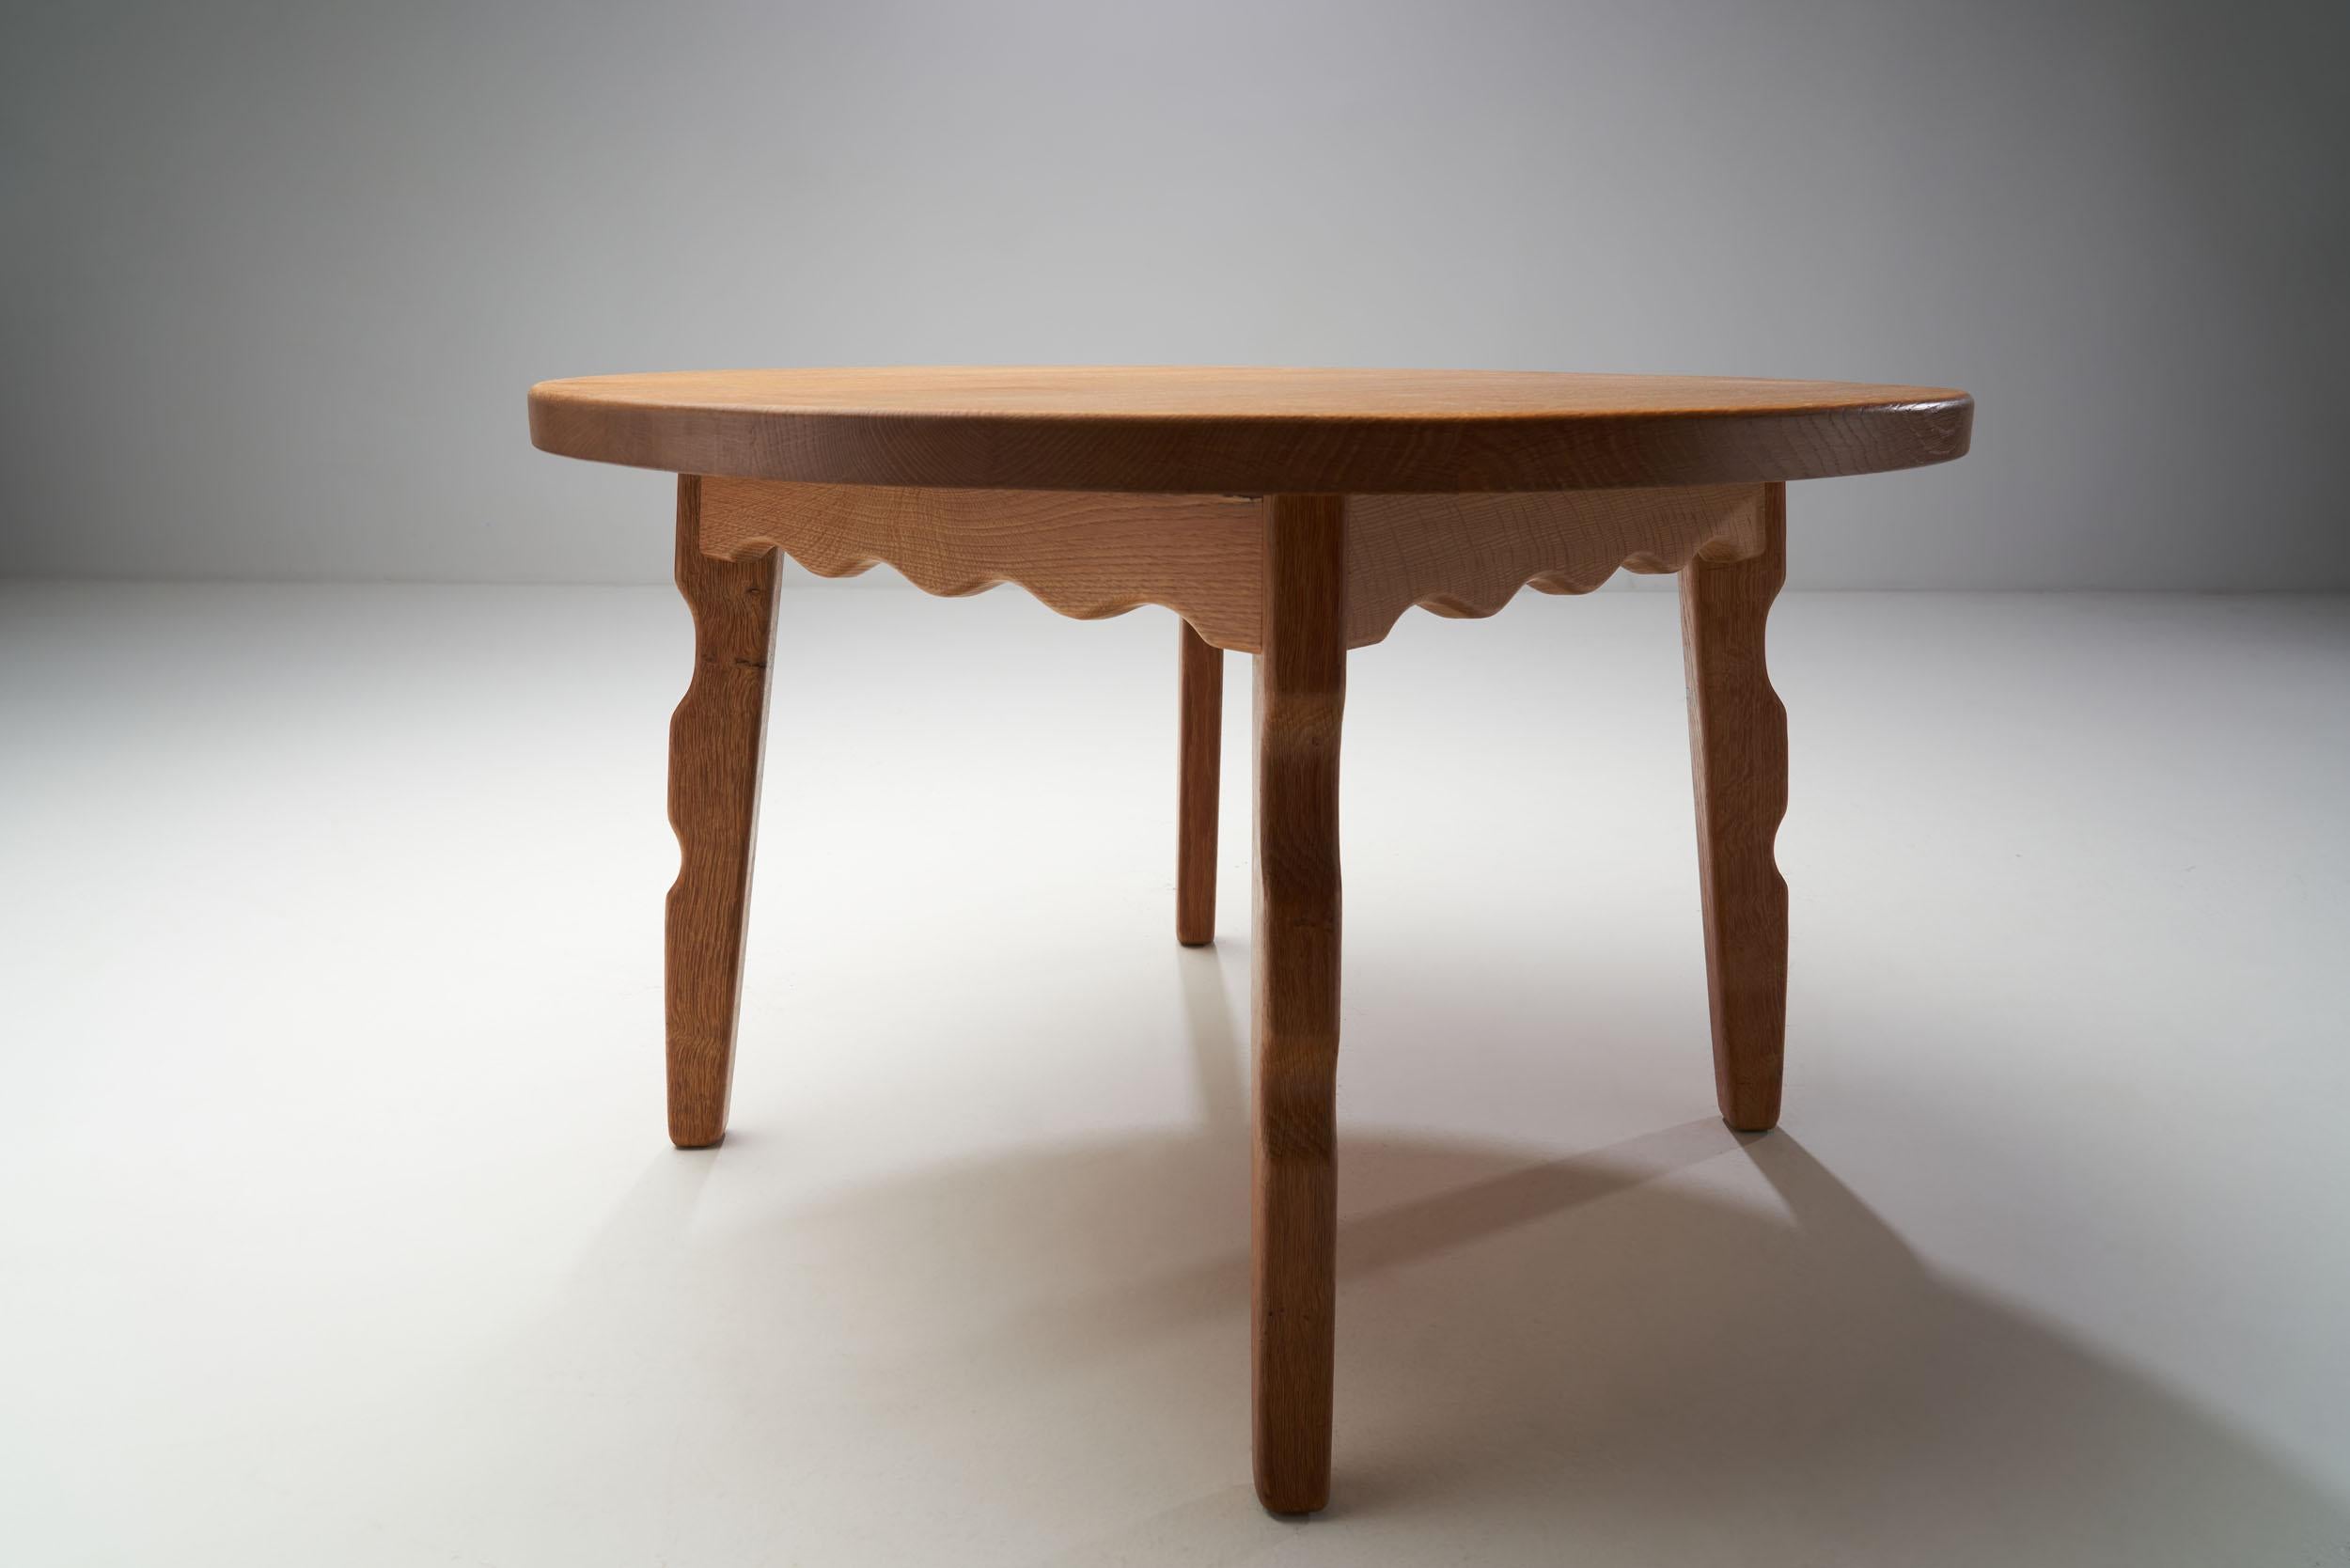 Solid Oak Coffee Table with Sculptural Legs, Denmark, ca 1950s For Sale 1